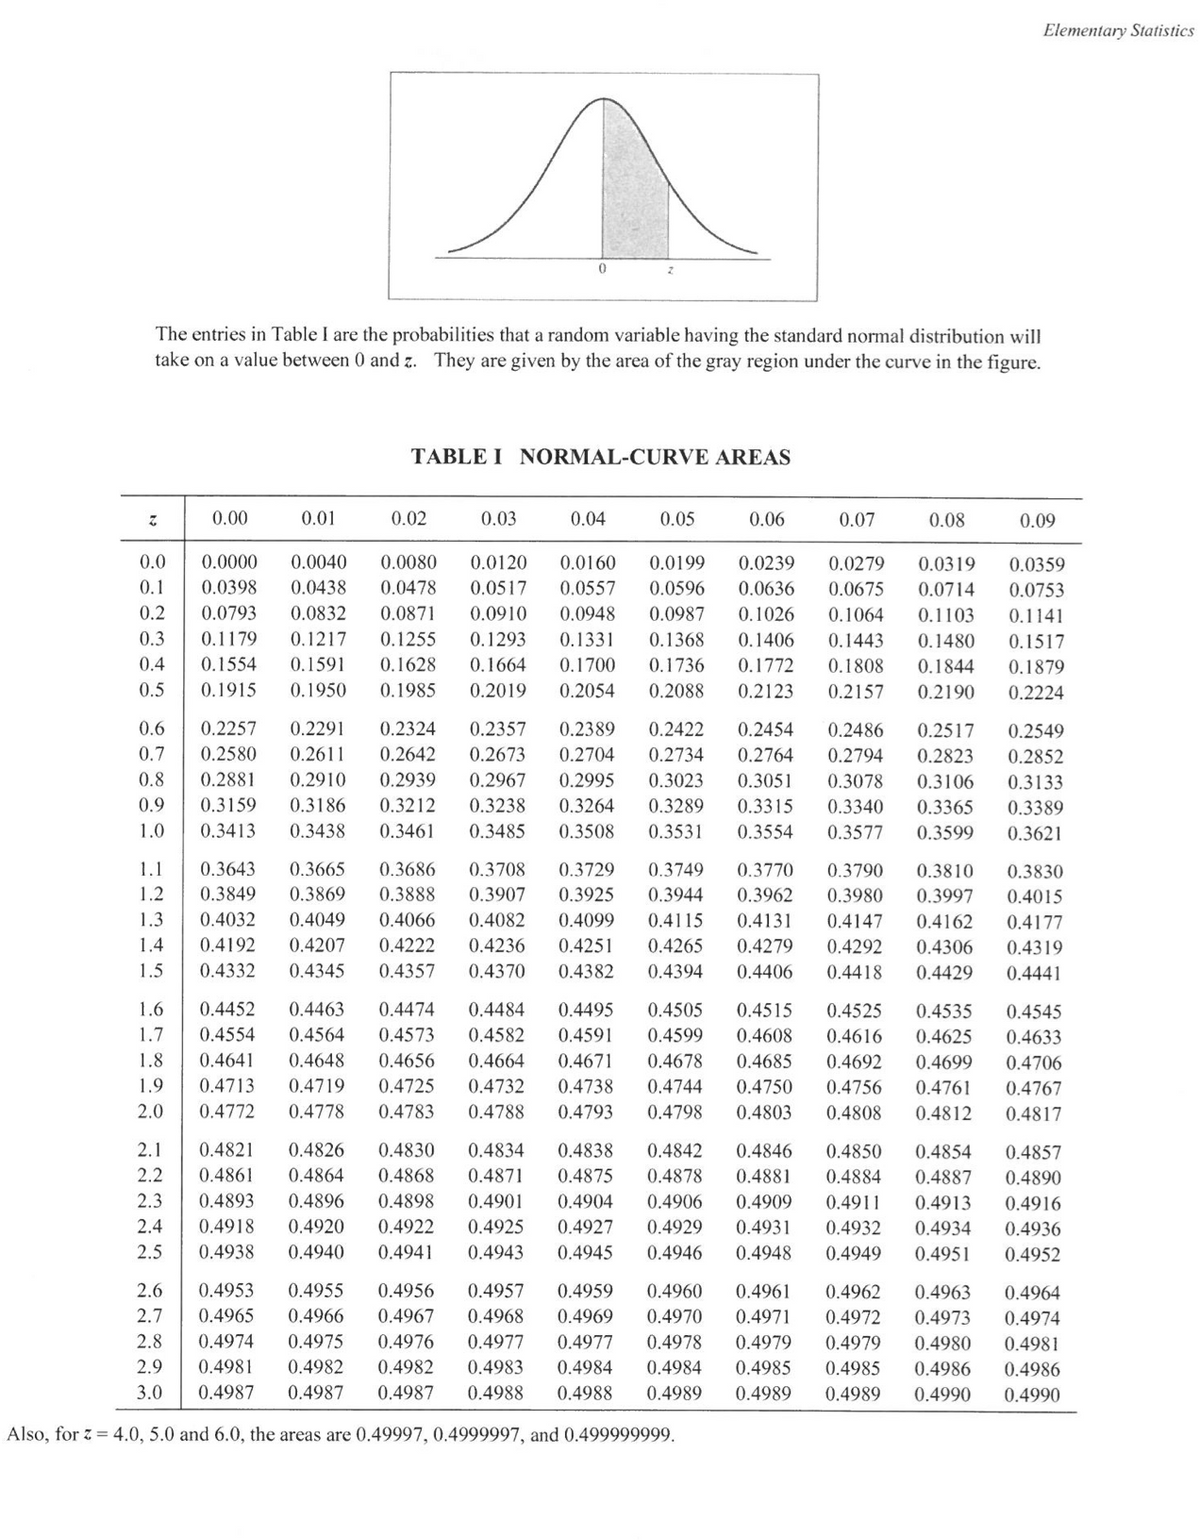 Elementary Statistics
The entries in Table I are the probabilities that a random variable having the standard normal distribution will
take on a value between 0 and z. They are given by the area of the gray region under the curve in the figure.
TABLE I NORMAL-CURVE AREAS
0.00
0.01
0.02
0.03
0.04
0.05
0.06
0.07
0.08
0.09
0.0
0.0000
0.0040
0.0080
0.0120
0.0160
0.0199
0.0239
0.0279
0.0319
0.0359
0.1
0.0398
0.0438
0.0478
0.0517
0.0557
0.0596
0.0636
0.0675
0.0714
0.0753
0.2
0.0793
0.0832
0.0871
0.0910
0.0948
0.0987
0.1026
0.1064
0.1103
0.1141
0.3
0.1179
0.1217
0.1255
0.1293
0.1331
0.1368
0.1406
0.1443
0.1480
0.1517
0.4
0.1554
0.1591
0.1628
0.1664
0.1700
0.1736
0.1772
0.1808
0.1844
0.1879
0.5
0.1915
0.1950
0.1985
0.2019
0.2054
0.2088
0.2123
0.2157
0.2190
0.2224
0.6
0.2257
0.2291
0.2324
0.2357
0.2389
0.2422
0.2454
0.2486
0.2517
0.2549
0.7
0.2580
0.2611
0.2642
0.2673
0.2704
0.2734
0.2764
0.2794
0.2823
0.2852
0.8
0.2881
0.2910
0.2939
0.2967
0.2995
0.3023
0.3051
0.3078
0.3106
0.3133
0.9
0.3159
0.3186
0.3212
0.3238
0.3264
0.3289
0.3315
0.3340
0.3365
0.3389
1.0
0.3413
0.3438
0.3461
0.3485
0.3508
0.3531
0.3554
0.3577
0.3599
0.3621
1.1
0.3643
0.3665
0.3686
0.3708
0.3729
0.3749
0.3770
0.3790
0.3810
0.3830
1.2
0.3849
0.3869
0.3888
0.3907
0.3925
0.3944
0.3962
0.3980
0.3997
0.4015
1.3
0.4032
0.4049
0.4066
0.4082
0.4099
0.4115
0.4131
0.4147
0.4162
0.4177
1.4
0.4192
0.4207
0.4222
0.4236
0.4251
0.4265
0.4279
0.4292
0.4306
0.4319
1.5
0.4332
0.4345
0.4357
0.4370
0.4382
0.4394
0.4406
0.4418
0.4429
0.4441
1.6
0.4452
0.4463
0.4474
0.4484
0.4495
0.4505
0.4515
0.4525
0.4535
0.4545
1.7
0.4554
0.4564
0.4573
0.4582
0.4591
0.4599
0.4608
0.4616
0.4625
0.4633
1.8
0.4641
0.4648
0.4656
0.4664
0.4671
0.4678
0.4685
0.4692
0.4699
0.4706
1.9
0.4713
0.4719
0.4725
0.4732
0.4738
0.4744
0.4750
0.4756
0.4761
0.4767
2.0
0.4772
0.4778
0.4783
0.4788
0.4793
0.4798
0.4803
0.4808
0.4812
0.4817
2.1
0.4821
0.4826
0.4830
0.4834
0.4838
0.4842
0.4846
0.4850
0.4854
0.4857
2.2
0.4861
0.4864
0.4868
0.4871
0.4875
0.4878
0.4881
0.4884
0.4887
0.4890
2.3
0.4893
0.4896
0.4898
0.4901
0.4904
0.4906
0.4909
0.4911
0.4913
0.4916
2.4
0.4918
0.4920
0.4922
0.4925
0.4927
0.4929
0.4931
0.4932
0.4934
0.4936
2.5
0.4938
0.4940
0.4941
0.4943
0.4945
0.4946
0.4948
0.4949
0.4951
0.4952
2.6
0.4953
0.4955
0.4956
0.4957
0.4959
0.4960
0.4961
0.4962
0.4963
0.4964
2.7
0.4965
0.4966
0.4967
0.4968
0.4969
0.4970
0.4971
0.4972
0.4973
0.4974
2.8
0.4974
0.4975
0.4976
0.4977
0.4977
0.4978
0.4979
0.4979
0.4980
0.4981
2.9
0.4981
0.4982
0.4982
0.4983
0.4984
0.4984
0.4985
0.4985
0.4986
0.4986
3.0
0.4987
0.4987
0.4987
0.4988
0.4988
0.4989
0.4989
0.4989
0.4990
0.4990
Also, for z = 4.0, 5.0 and 6.0, the areas are 0.49997, 0.4999997, and 0.499999999.
